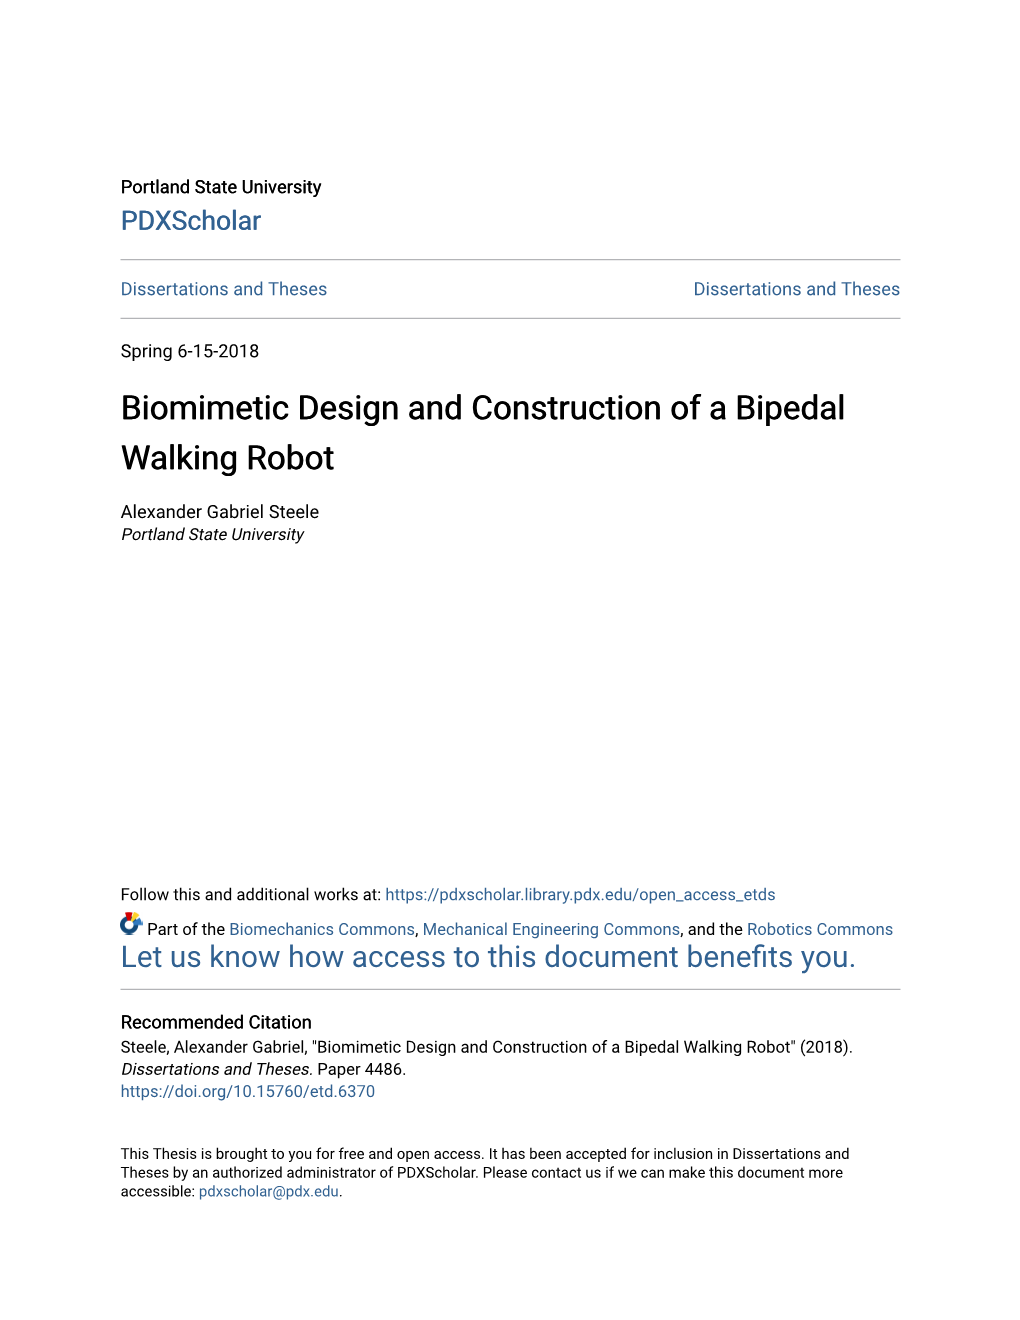 Biomimetic Design and Construction of a Bipedal Walking Robot